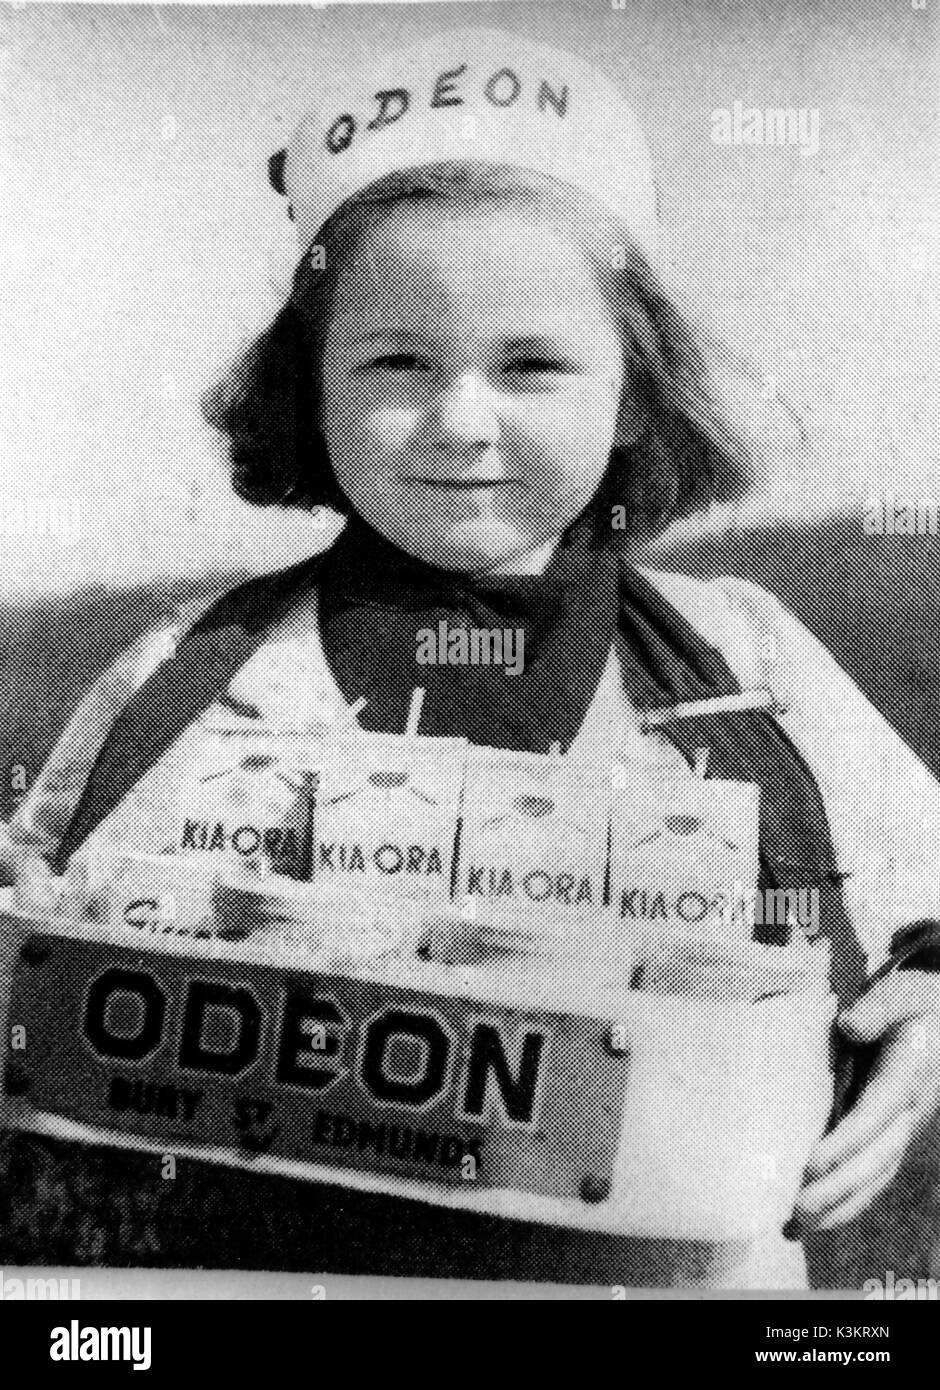 CHILD USHERETTE from the 1950s Stock Photo